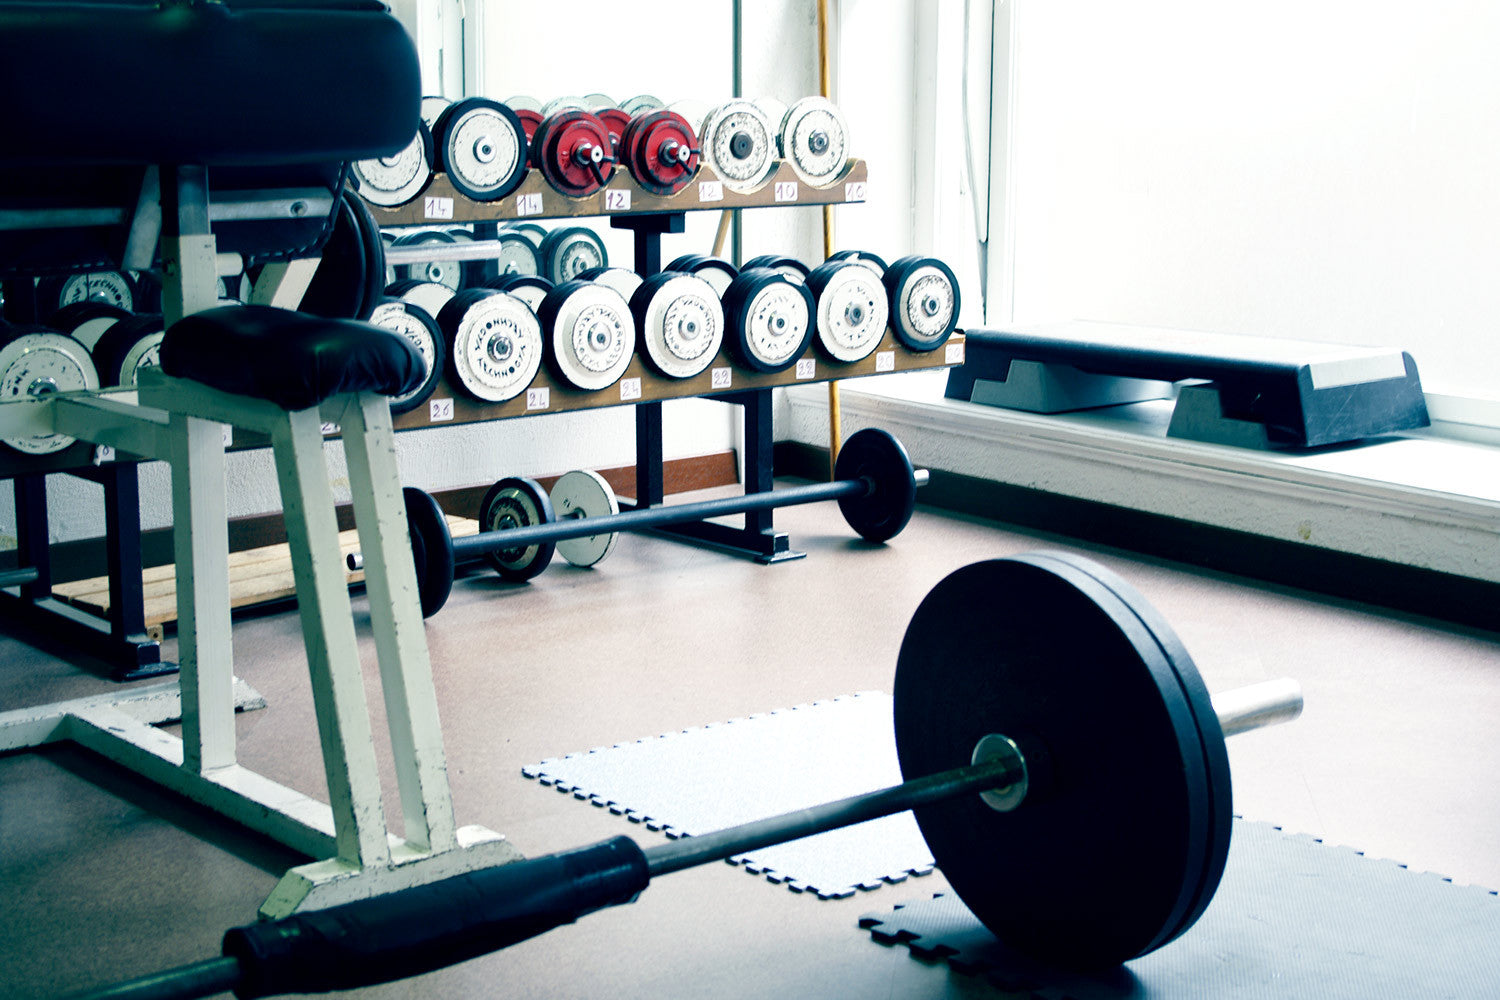 https://cdn.shopify.com/s/files/1/0916/1708/articles/prosource-blog-10-Things-You-Need-for-the-Perfect-Home-Gym.jpg?v=1545162040